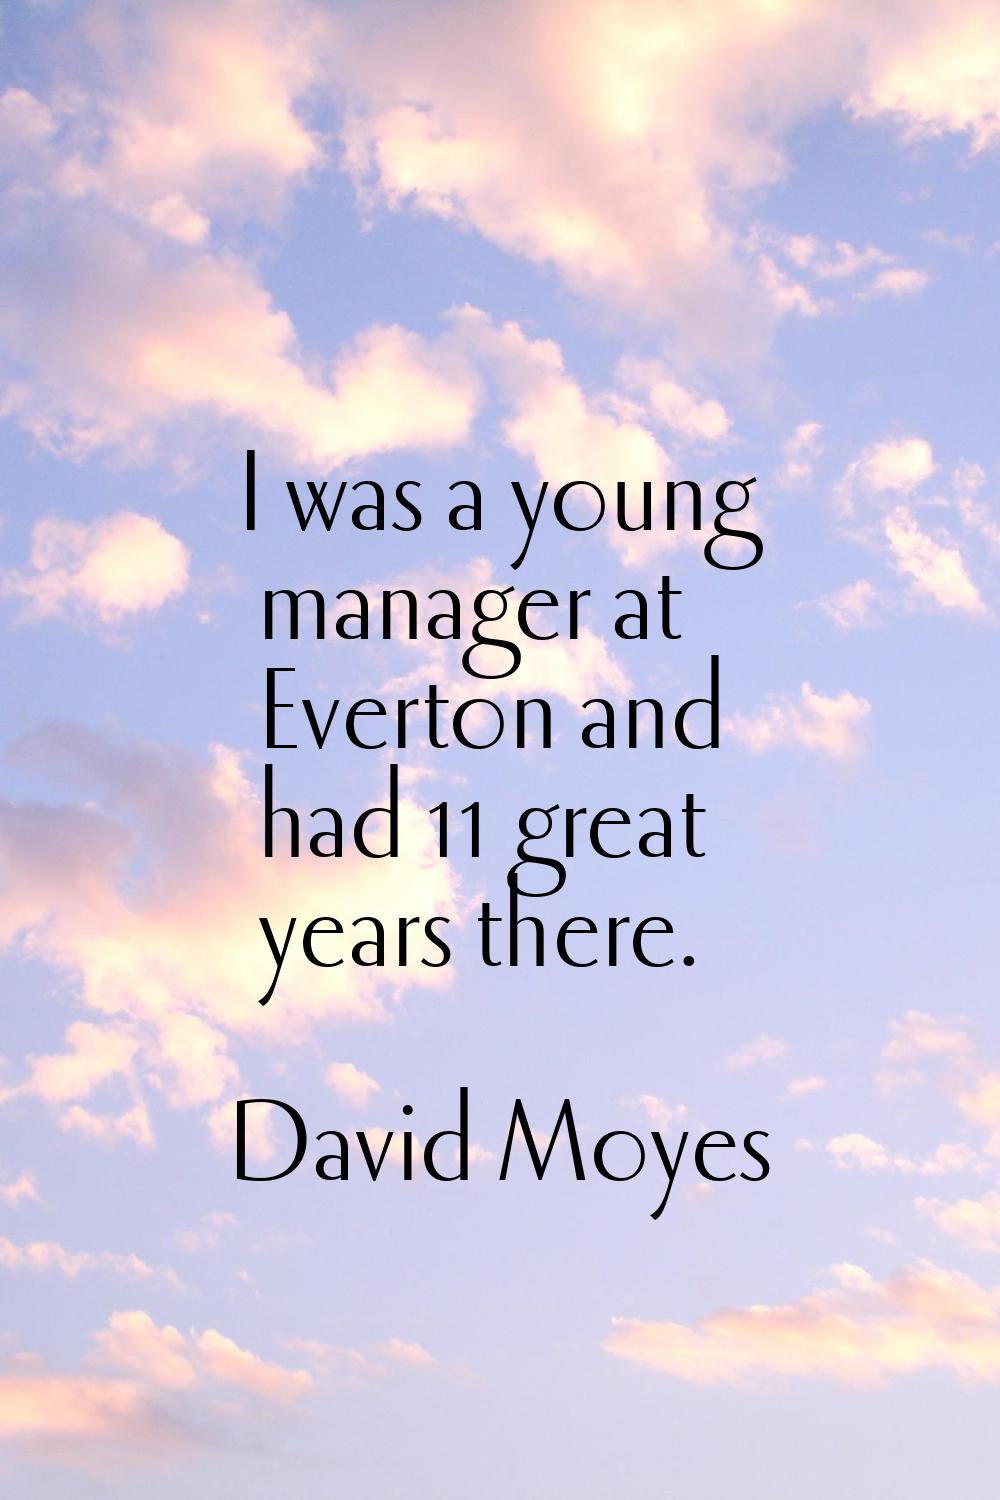 I was a young manager at Everton and had 11 great years there.